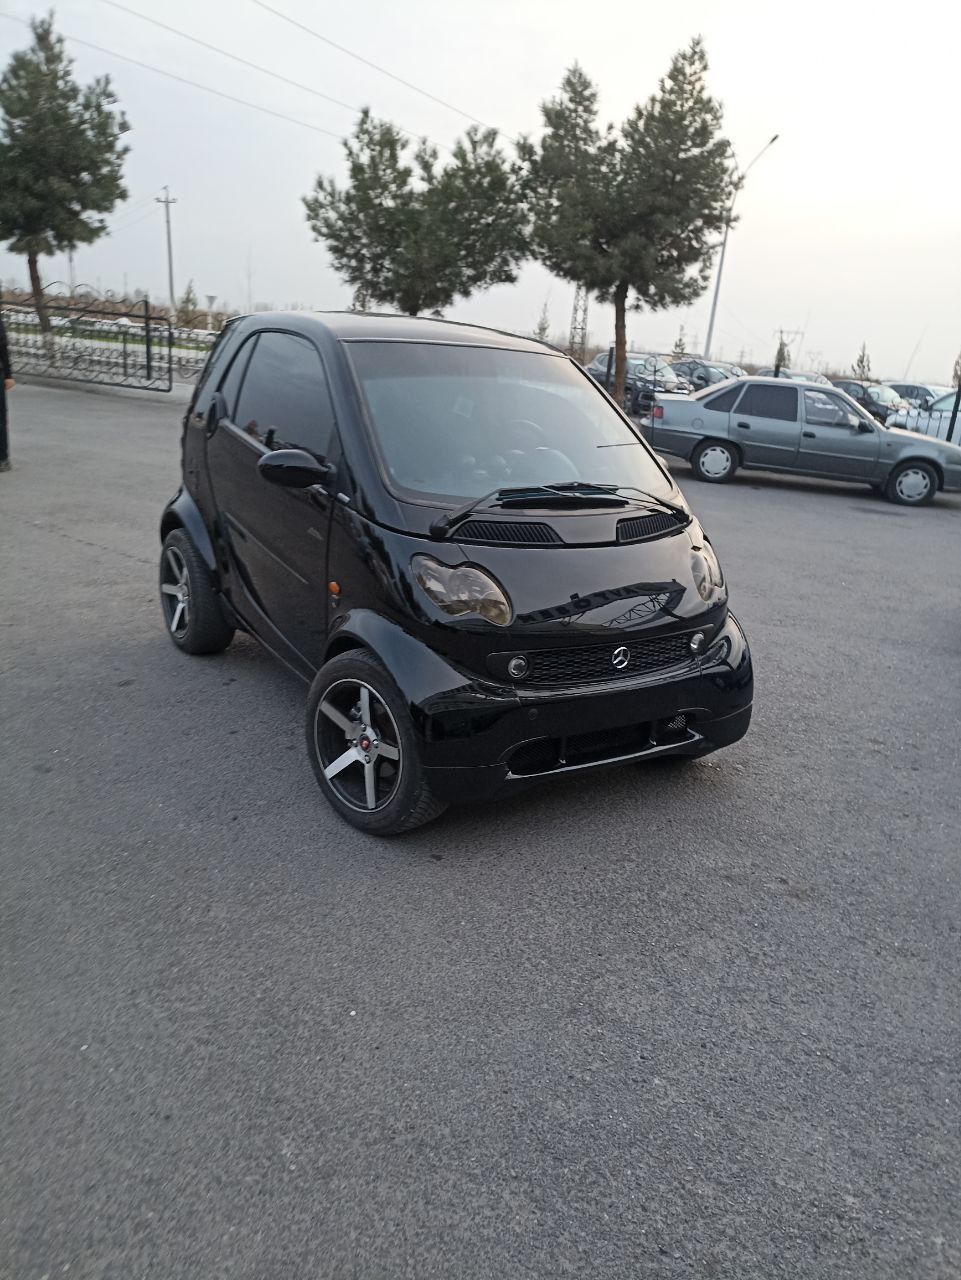 Mercedes Benz smart car coupe turbo